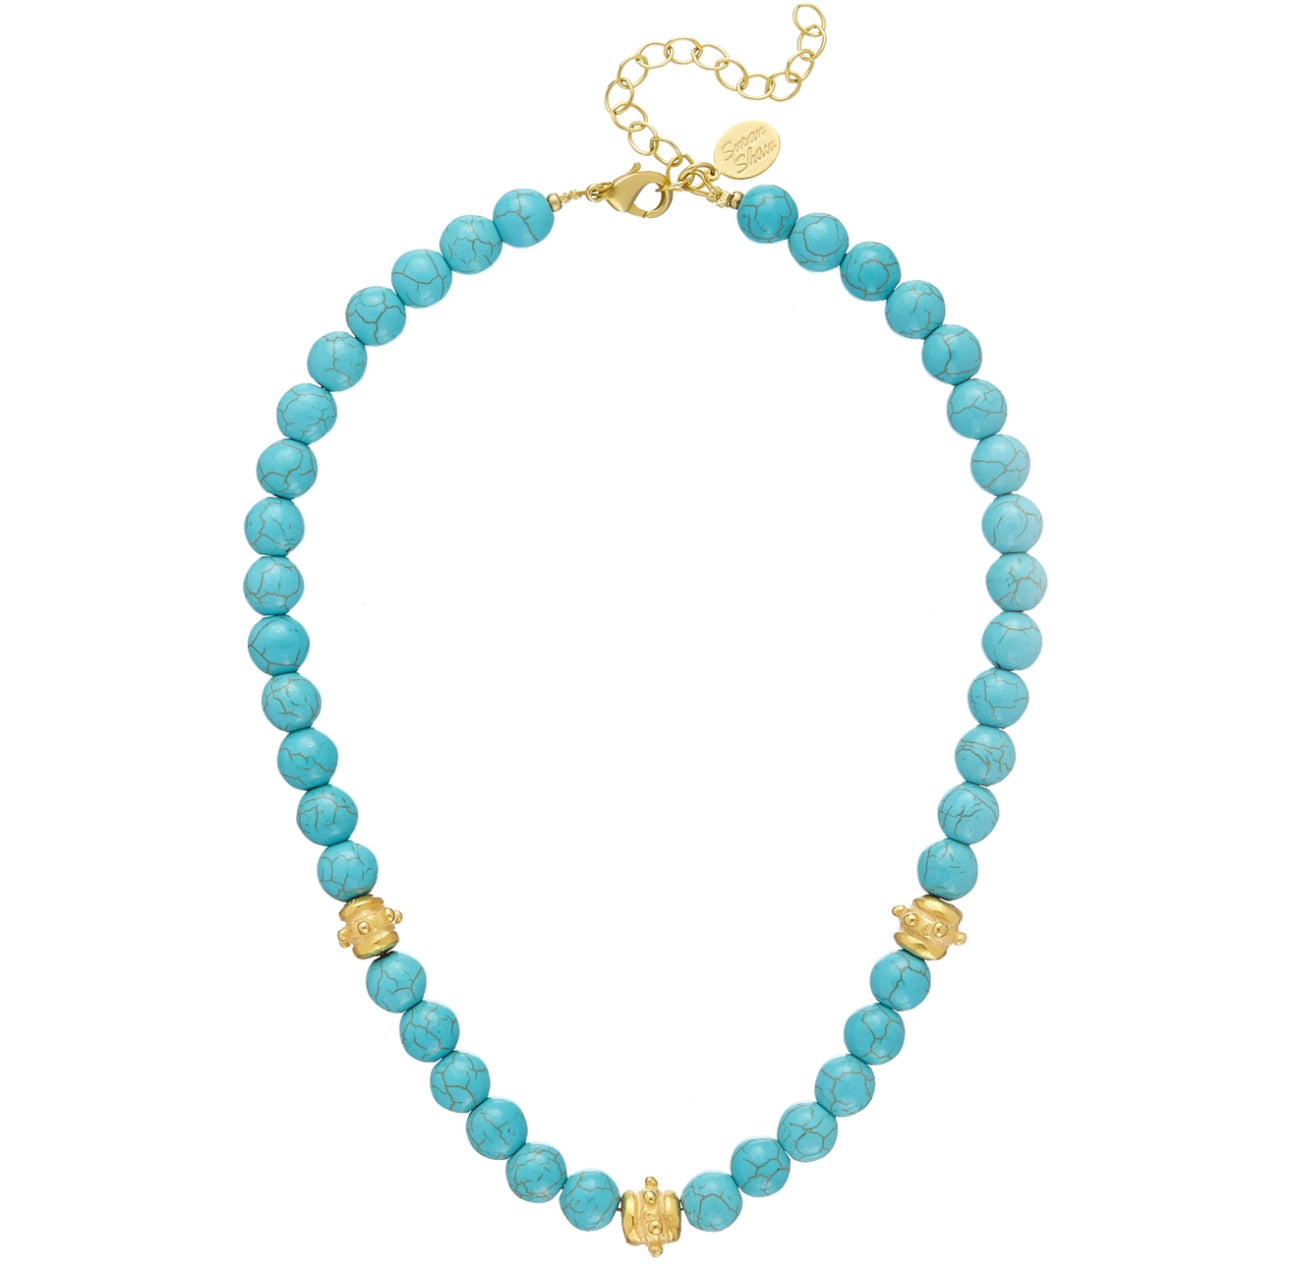 Genuine Turquoise with Handcast Gold Bentley Beads Necklace - Susan Shaw